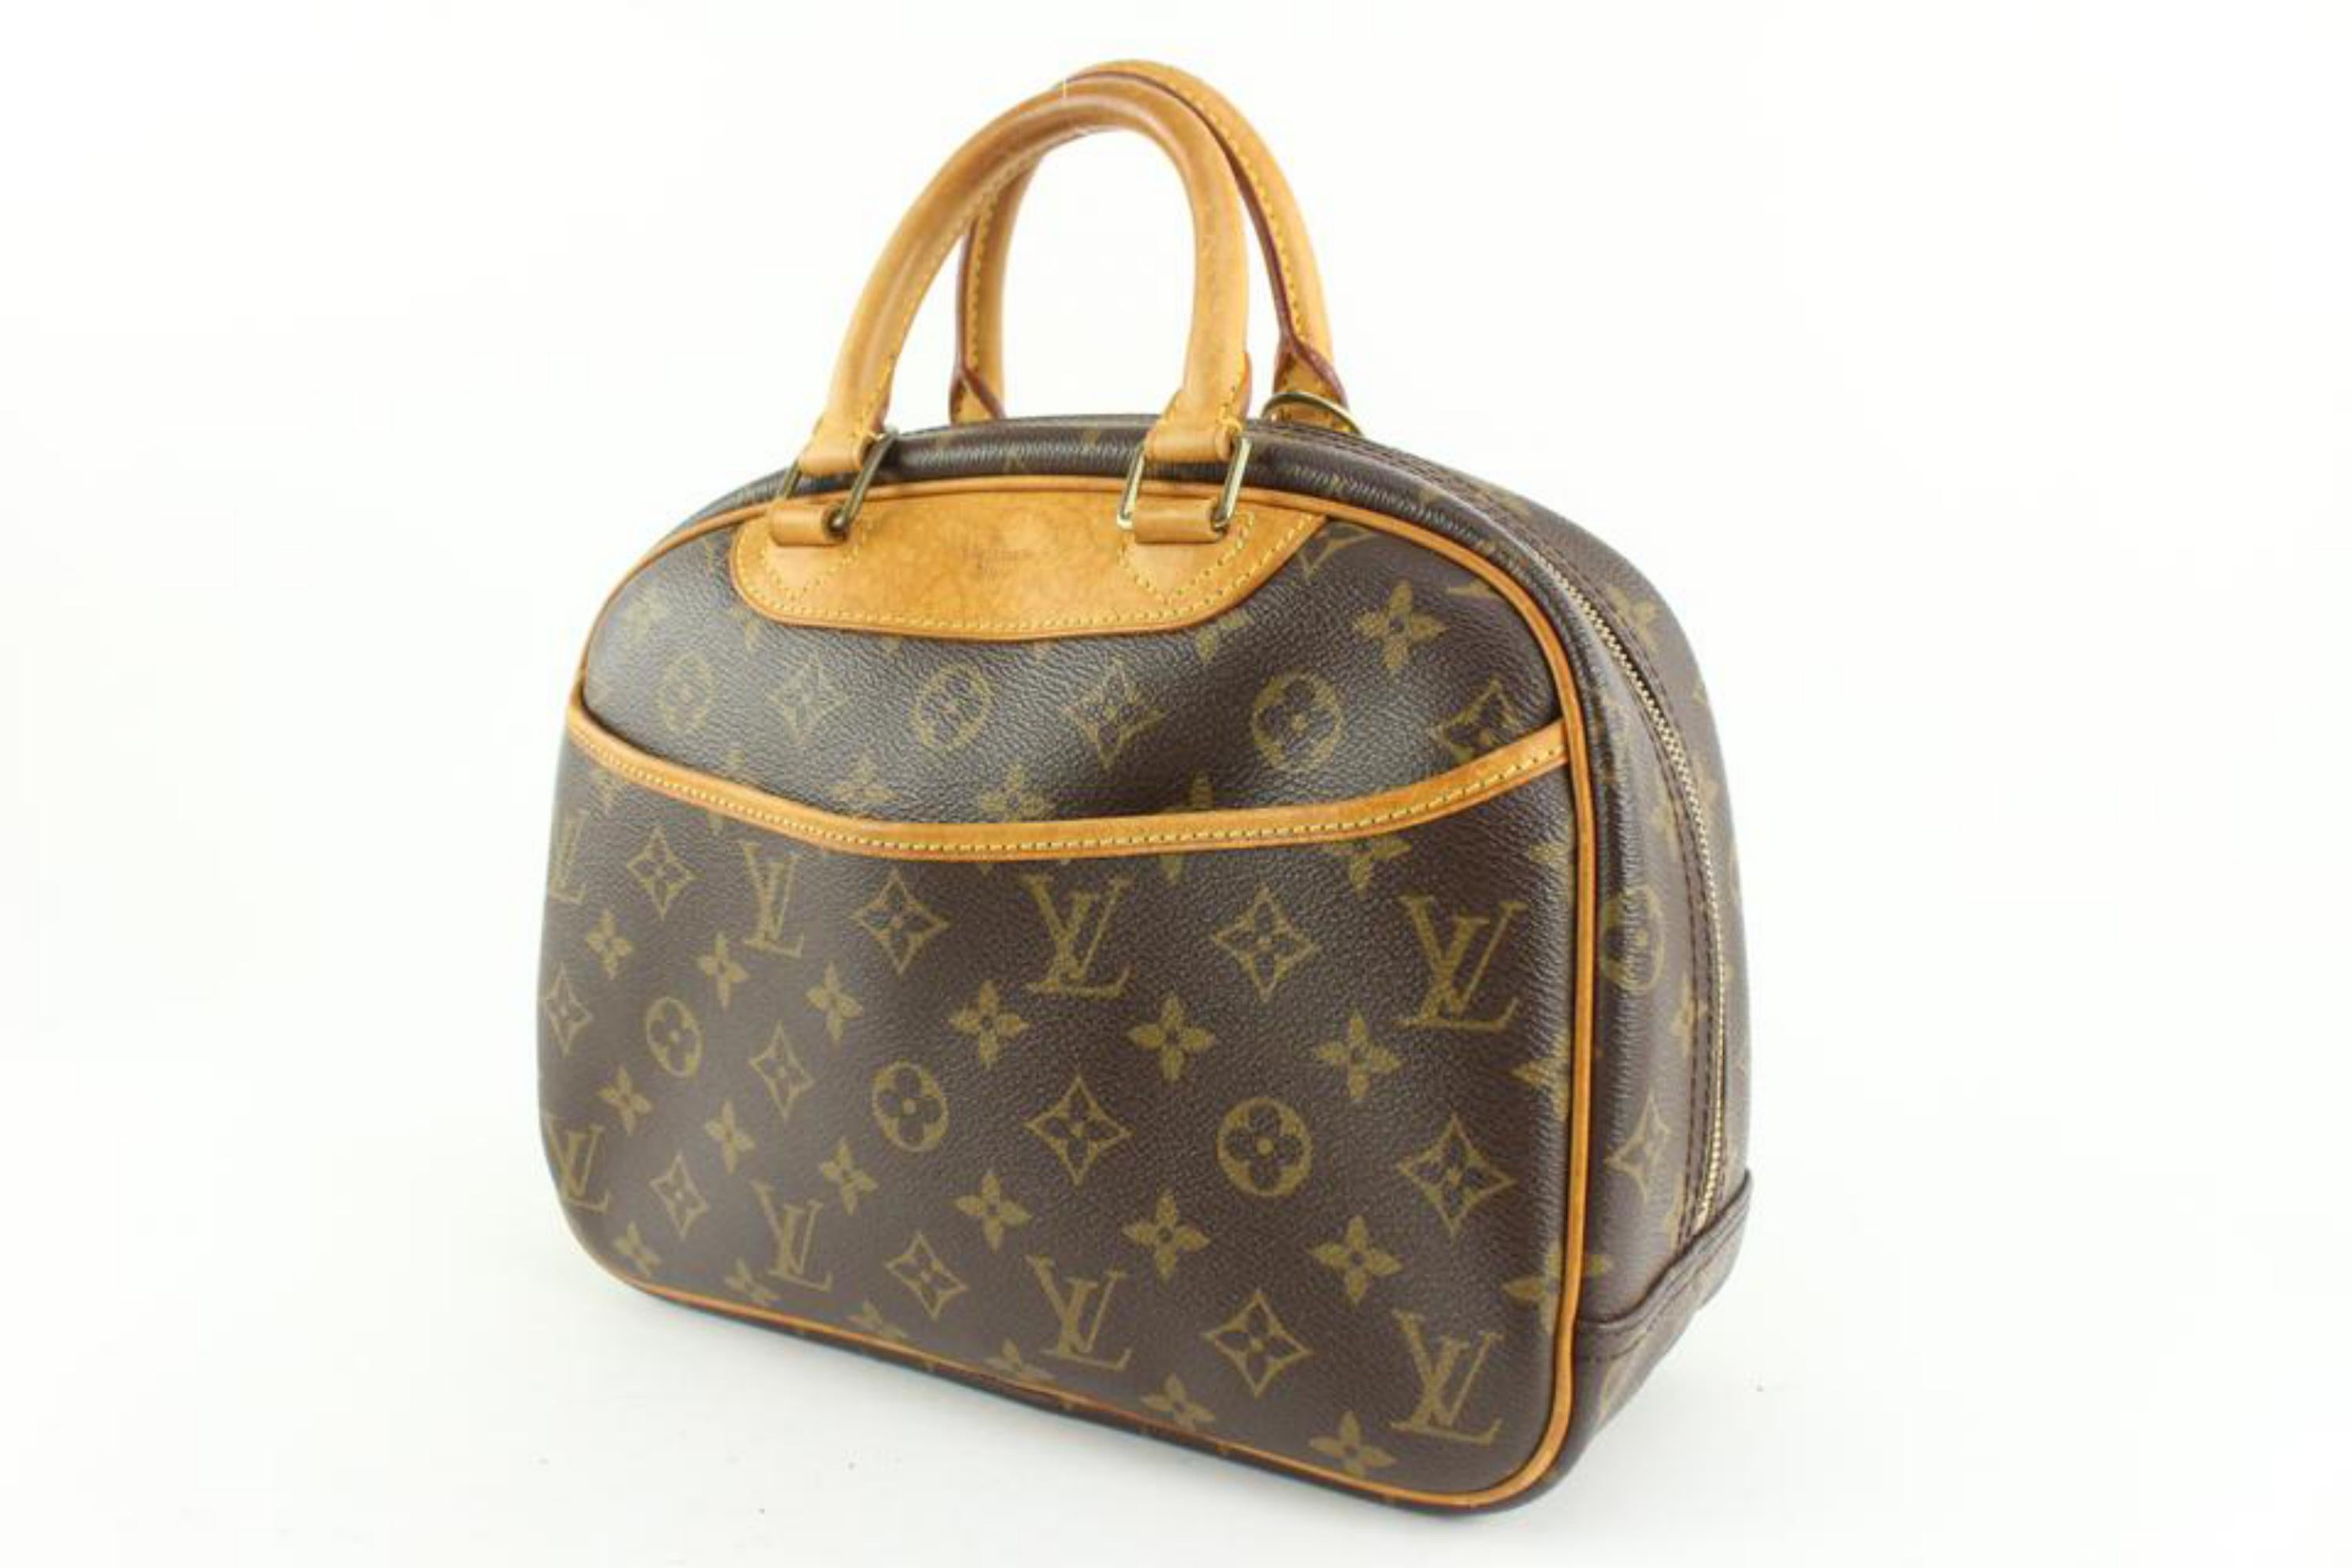 Louis Vuitton Monogram Trouville Bowler Bag 1224lv41
Date Code/Serial Number: MI1004
Made In: France
Measurements: Length:  11